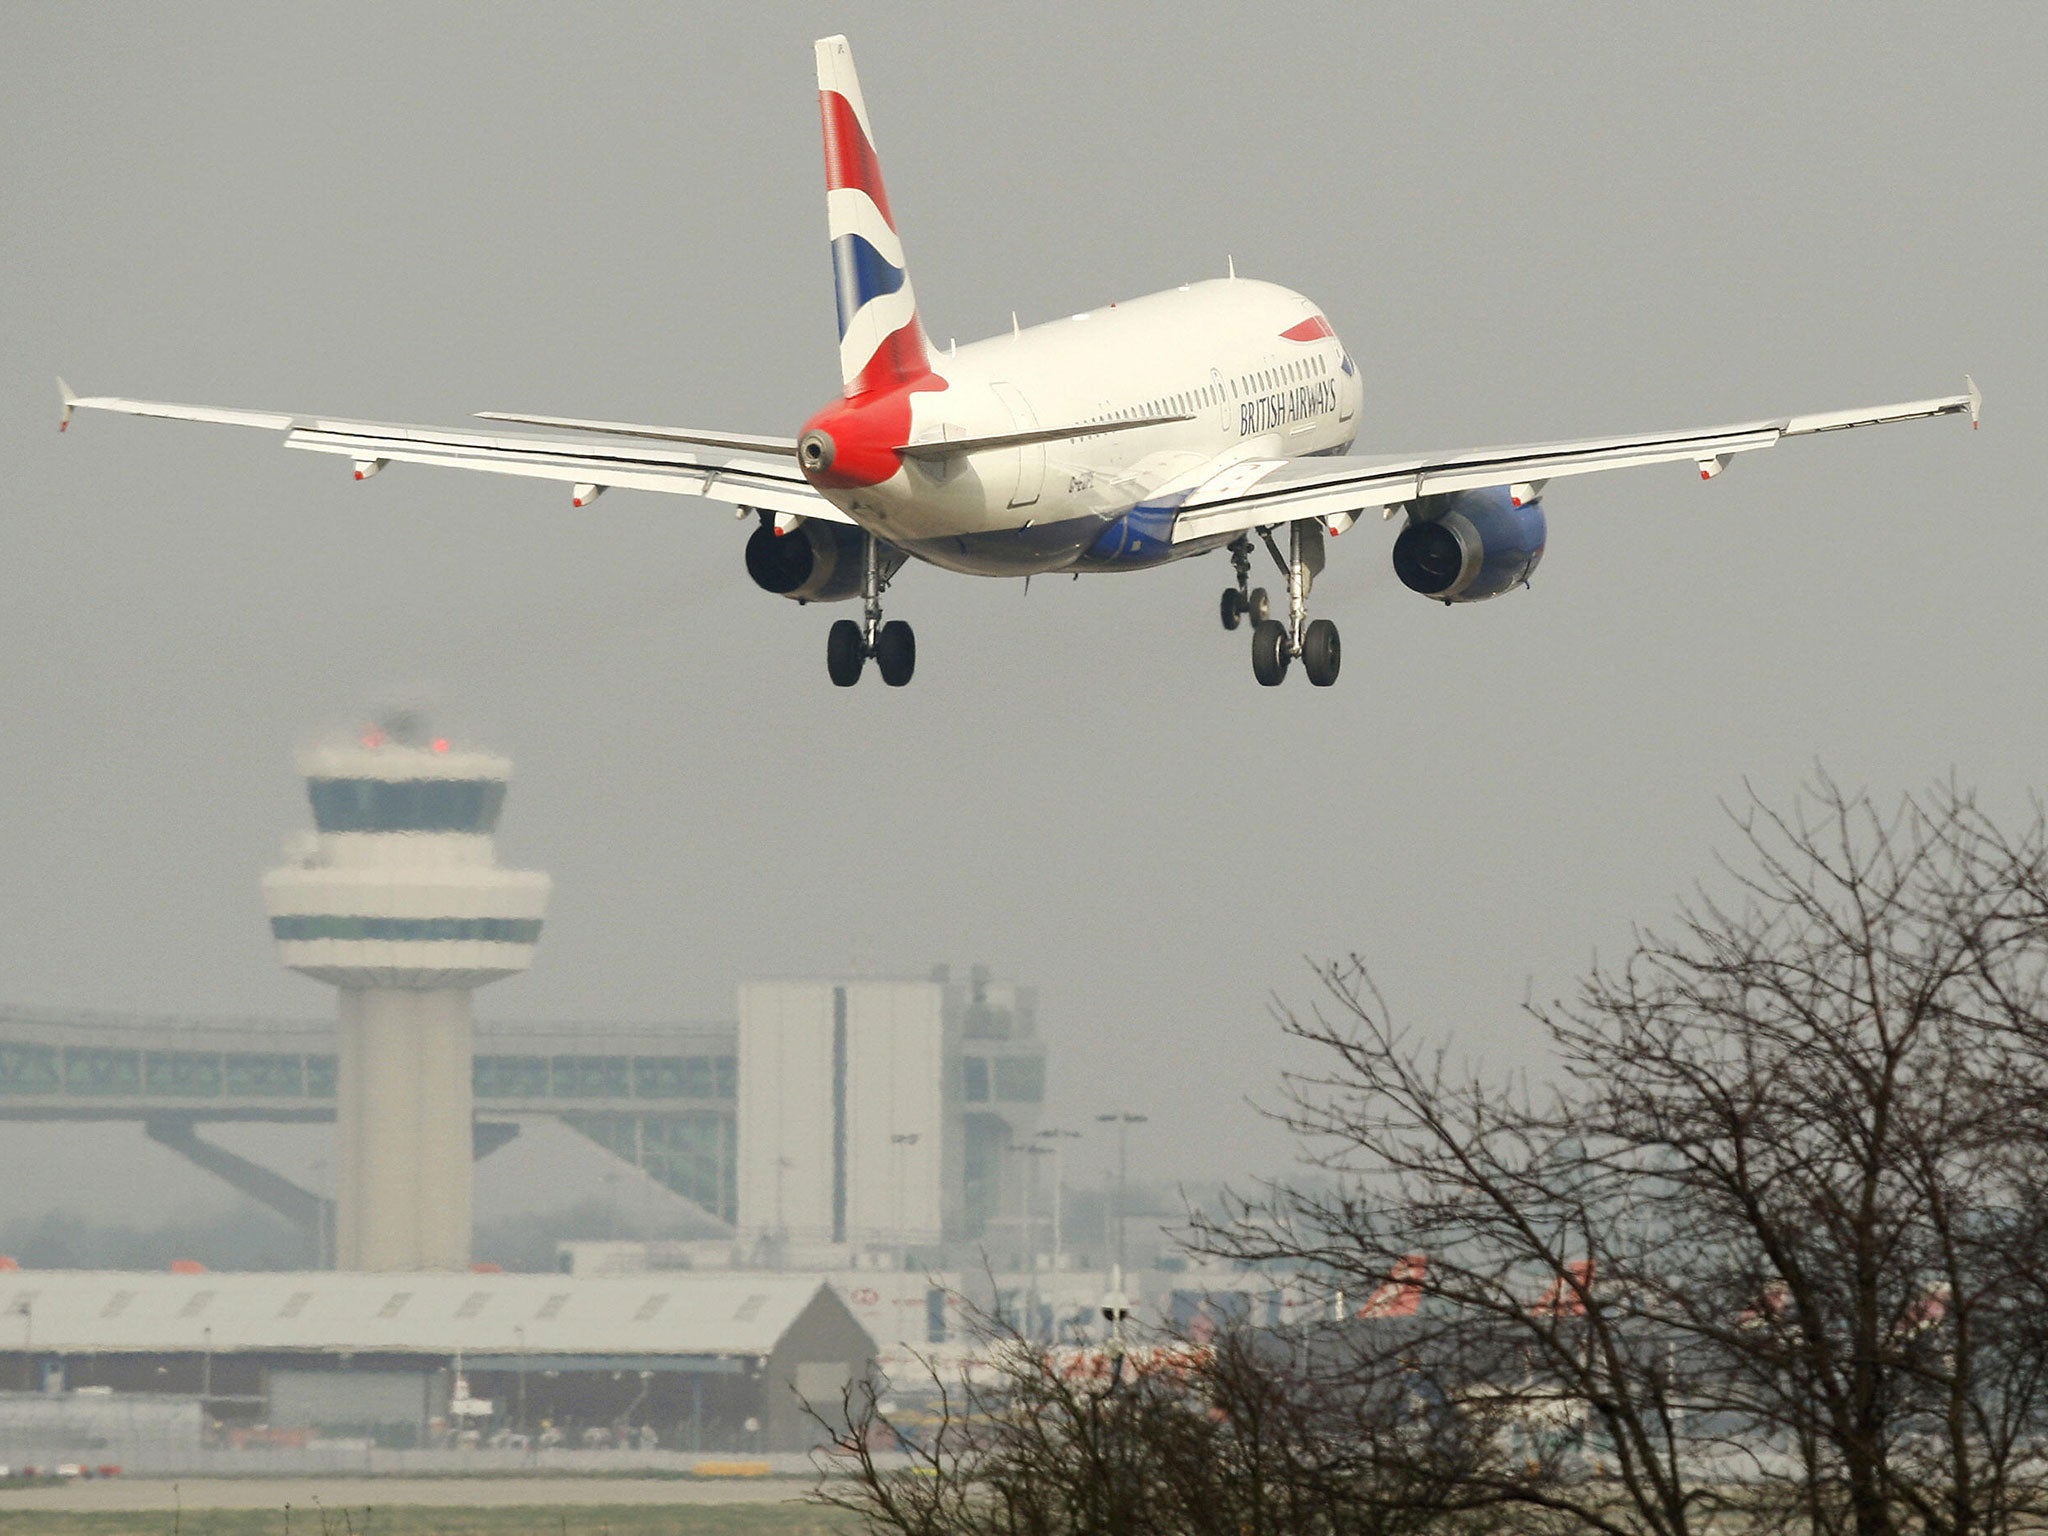 Eurocontrol said a computer failure is affecting London airspace, which could cause "potentially severe" flight delays.